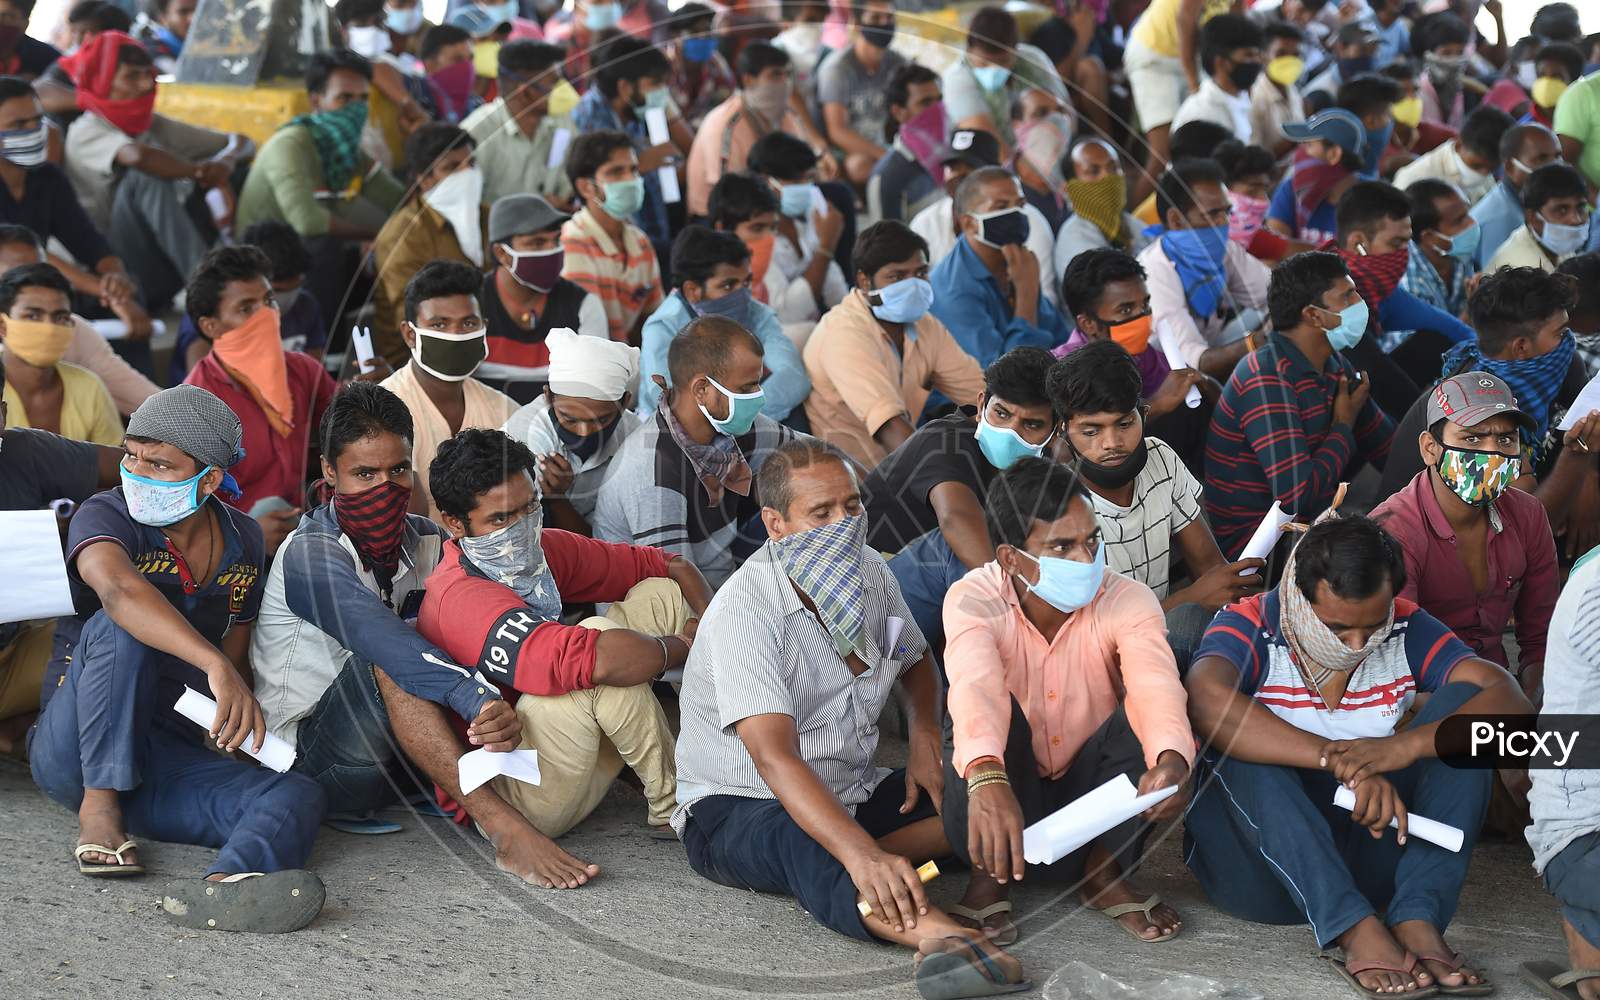 Migrant Labourers From Bihar Wait For Thermal Screening And Document Verification Before They Leave To Their Native Places During The Ongoing Nationwide Lockdown In The Wake Of Coronavirus Pandemic, In Chennai